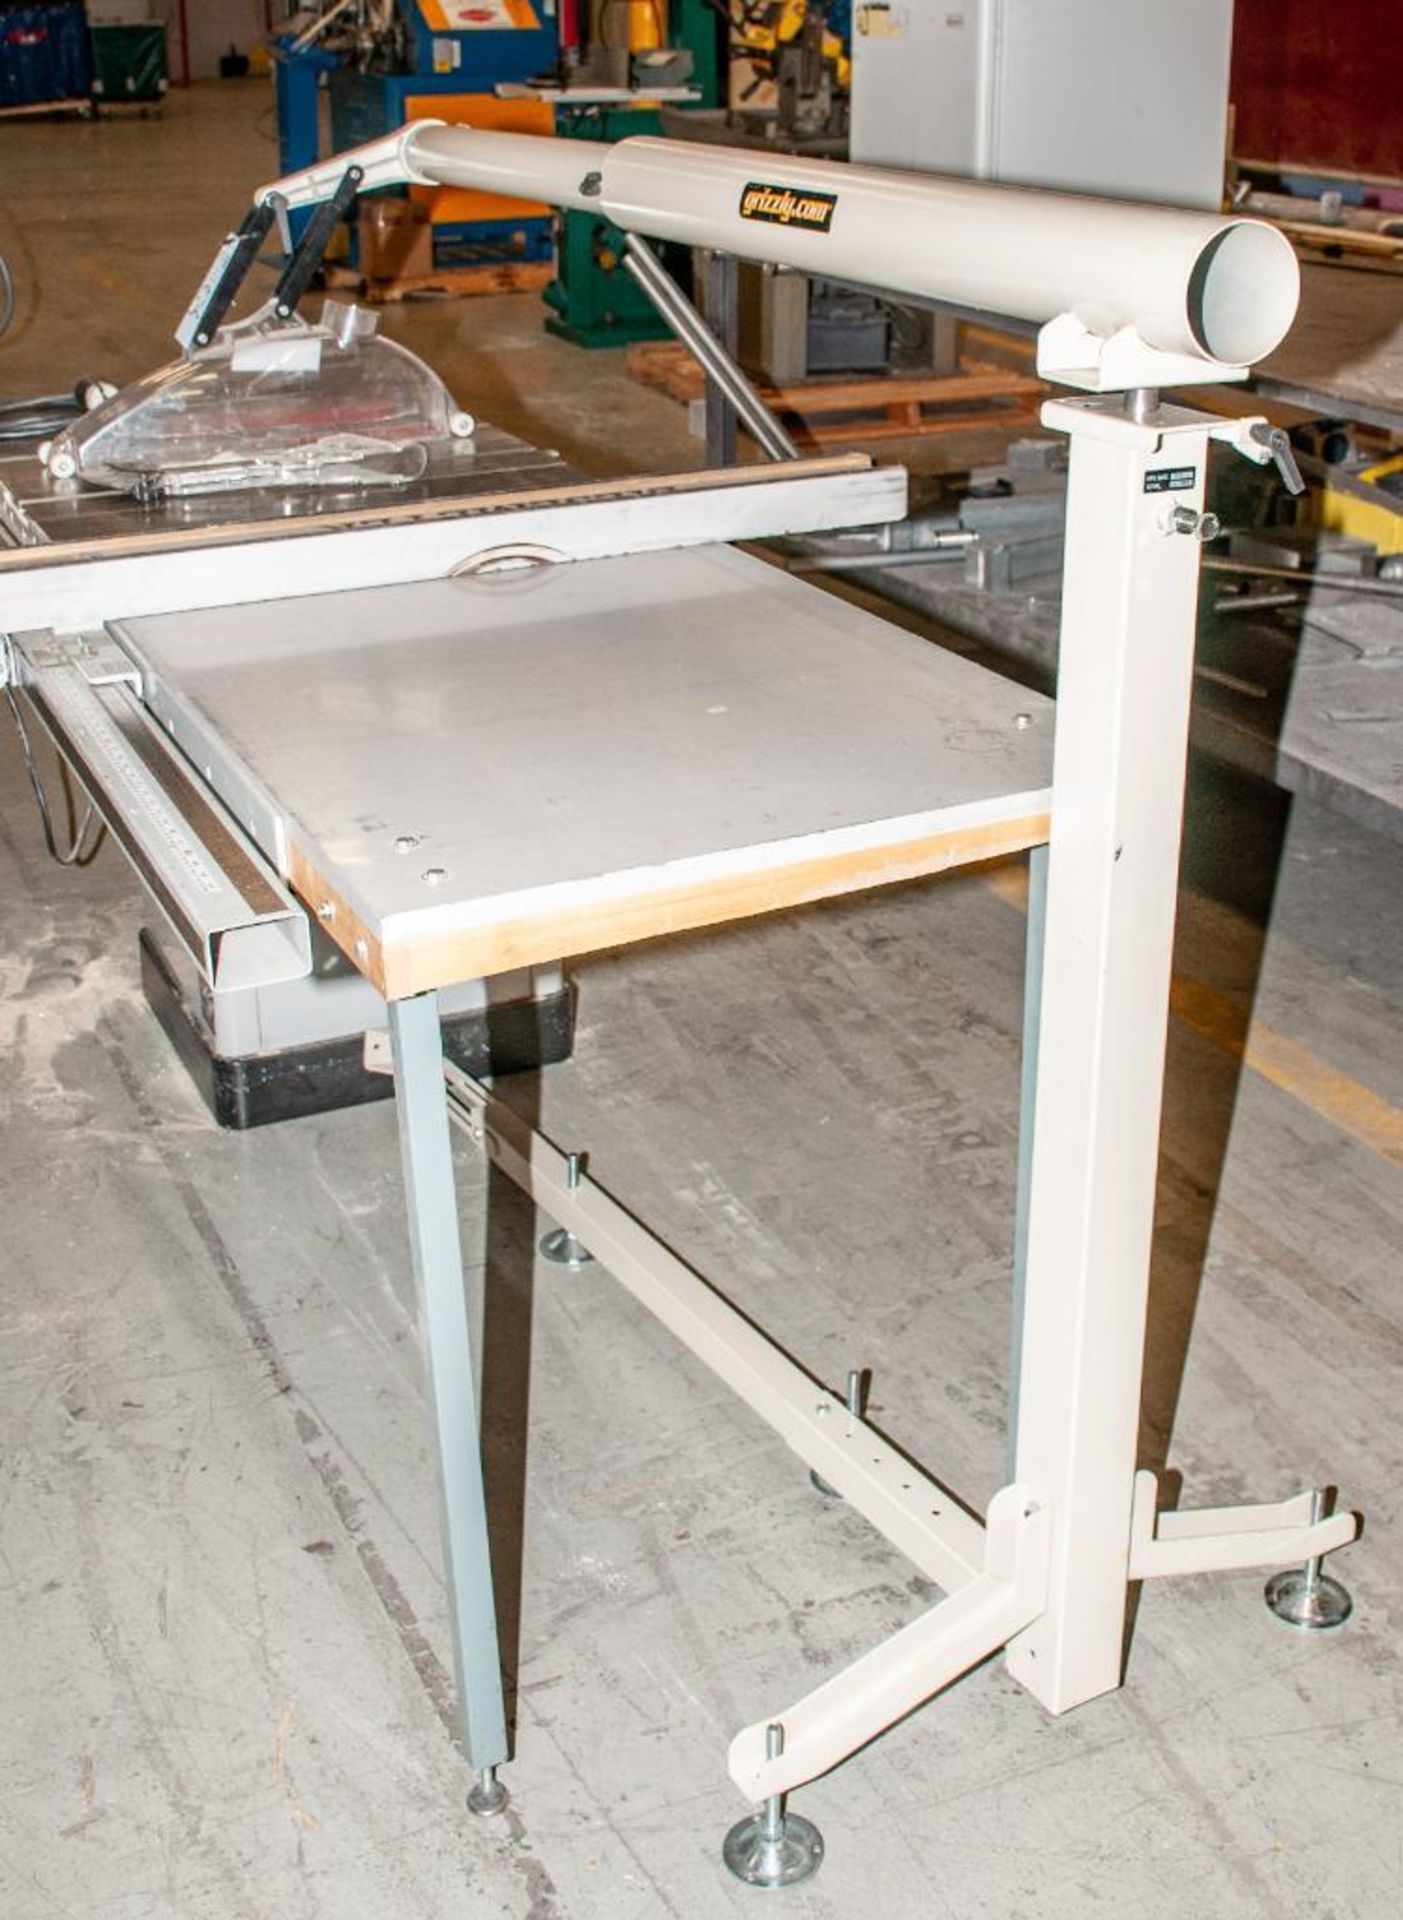 Delta X5 Unisaw Table Saw s/n 03E34152, 27 x 84" Table, w/Biesemeyer T-Square Fence, 3-HP, 230v and - Image 5 of 7